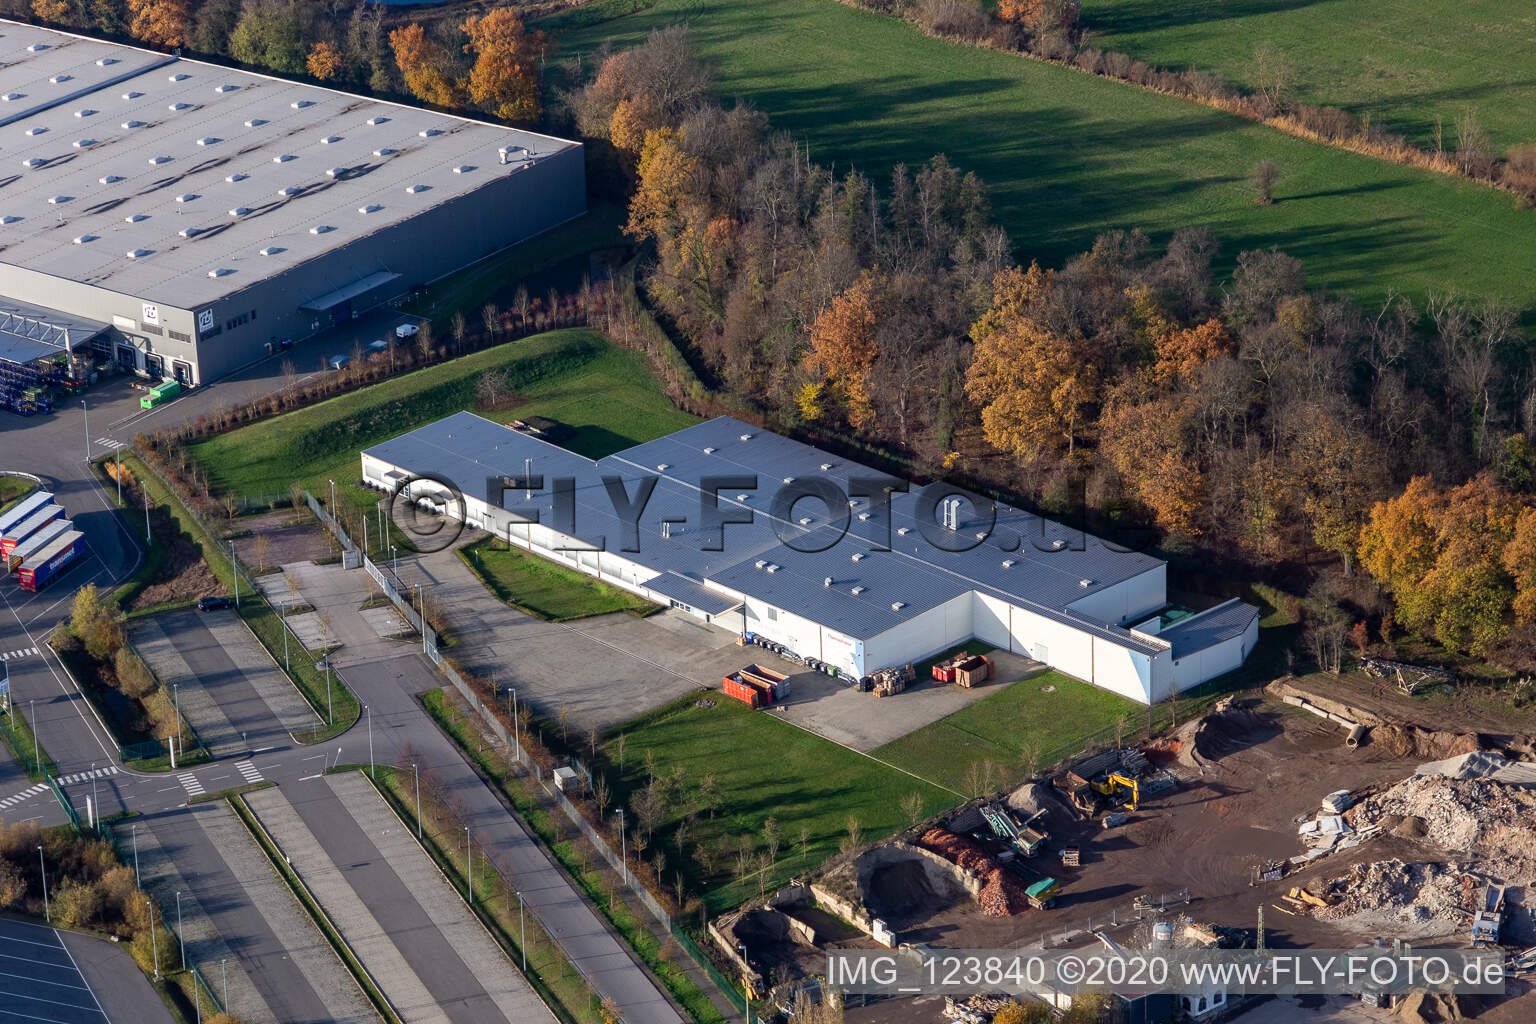 Building and production halls on the premises " ThermoFisher " in the district Minderslachen in Kandel in the state Rhineland-Palatinate, Germany